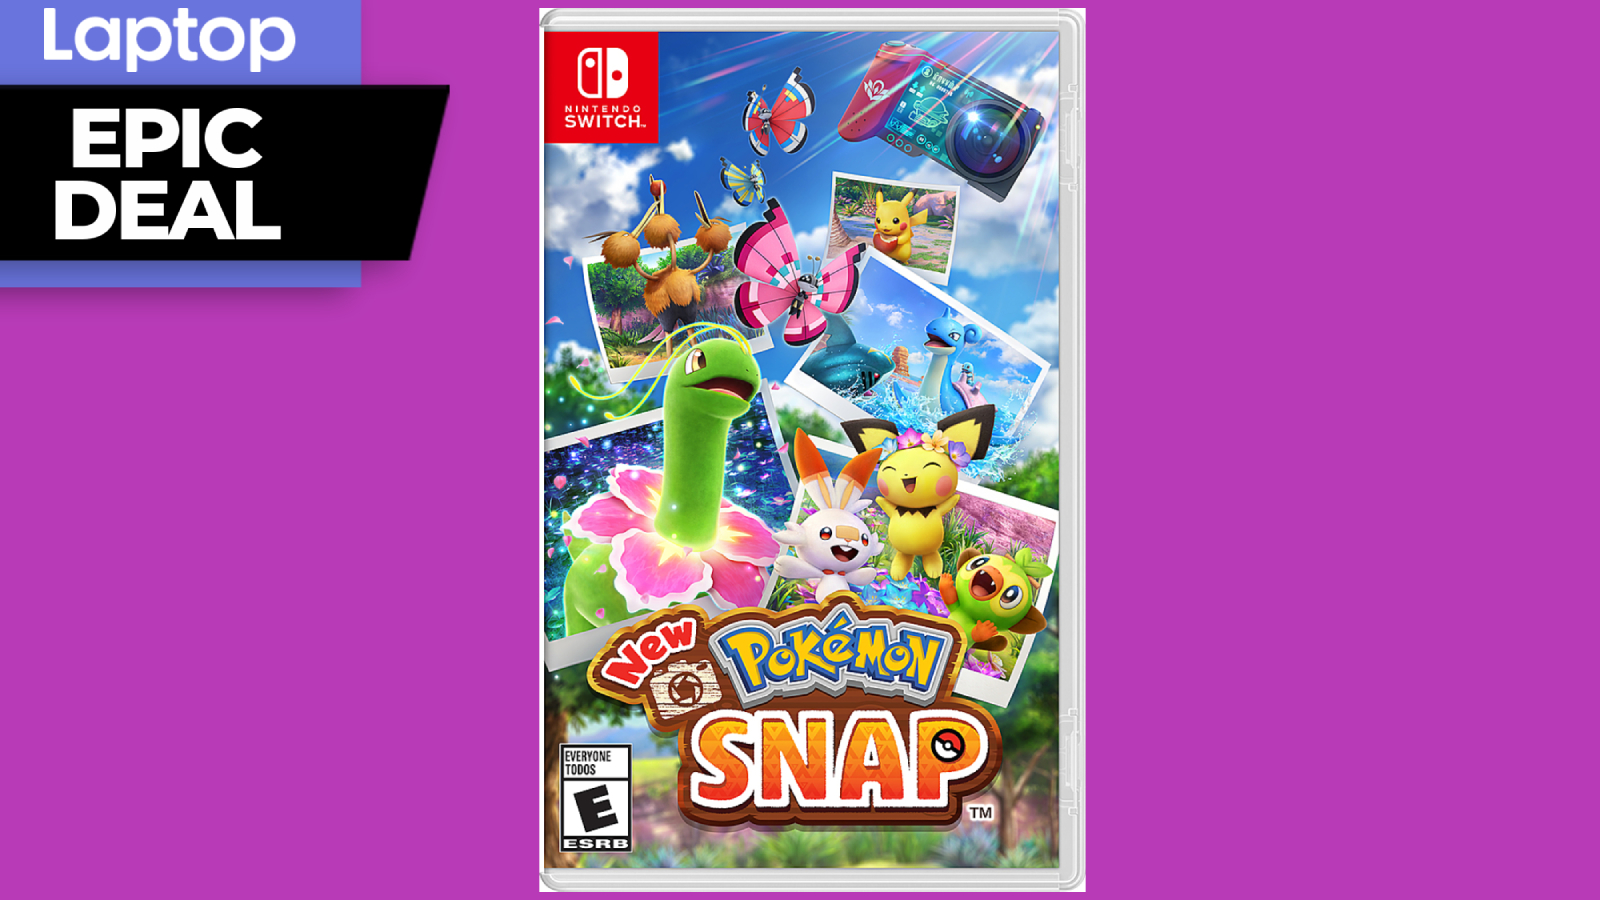 Save $18 on Pokemon Snap for Nintendo Switch